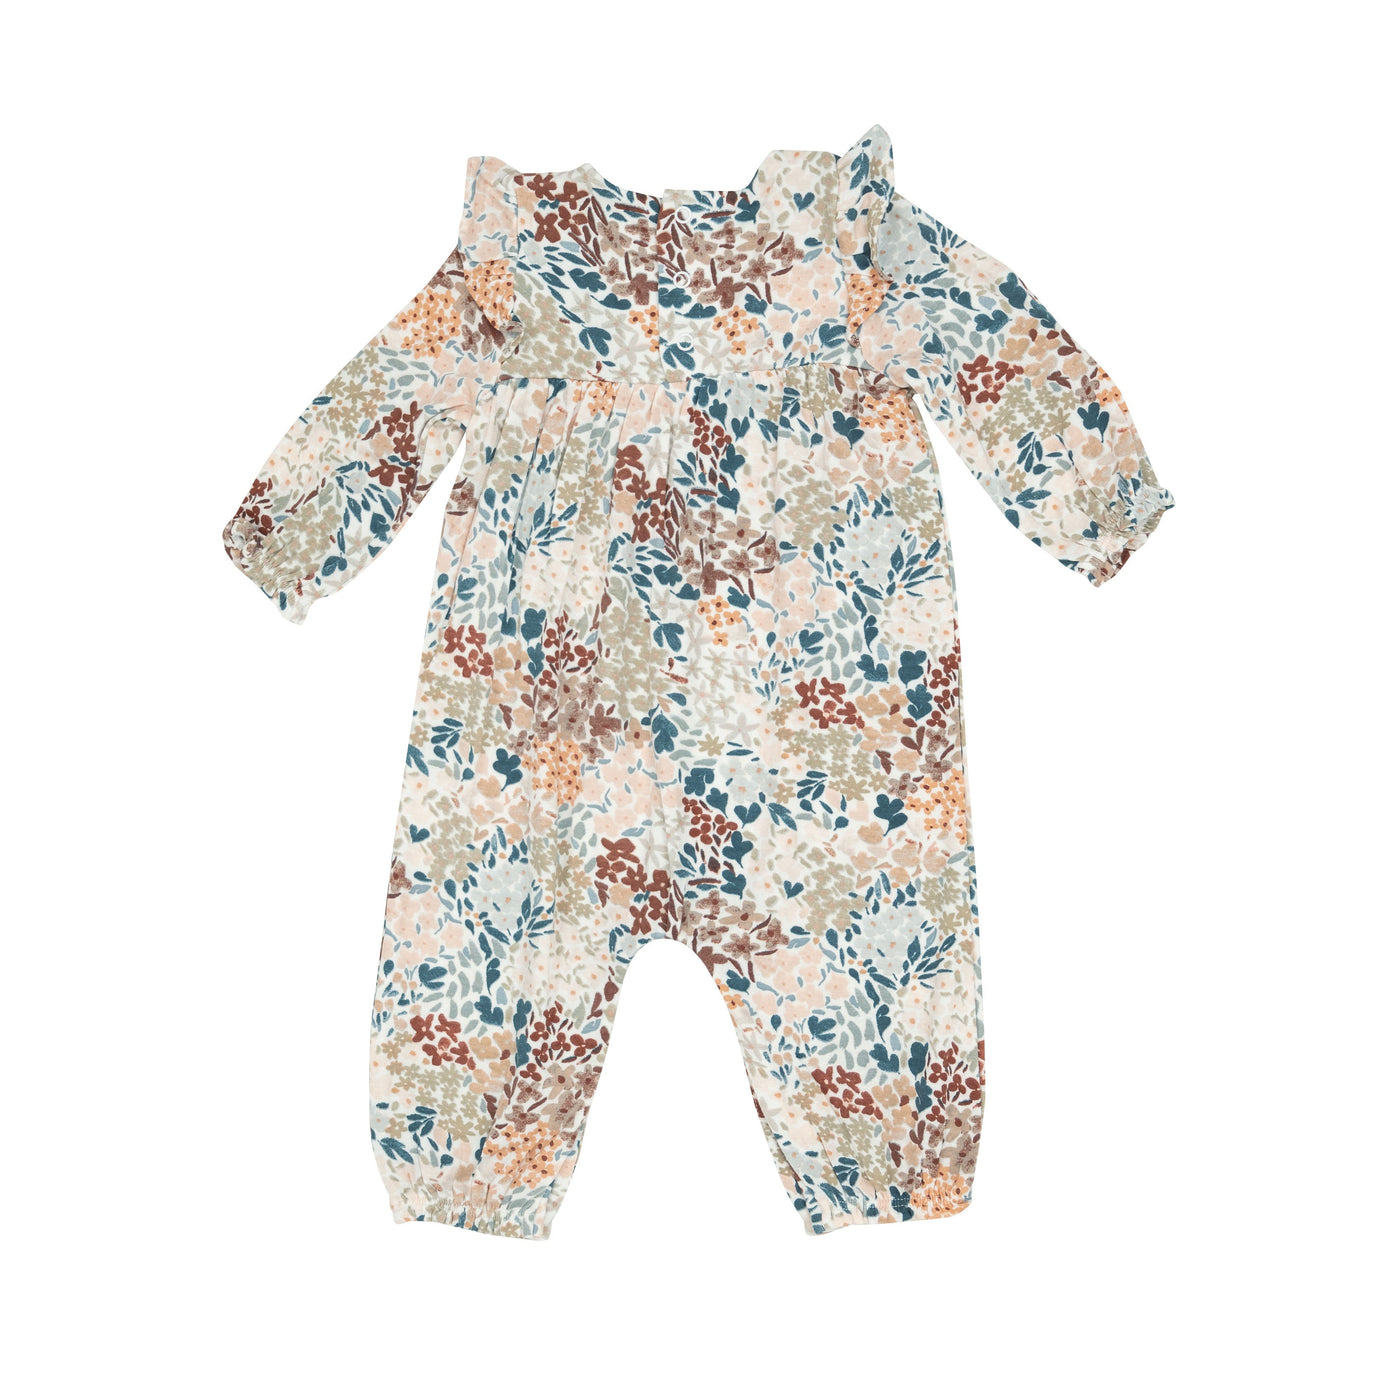 Ruffle Sleever Romper - Painted Fall Floral - Angel Dear